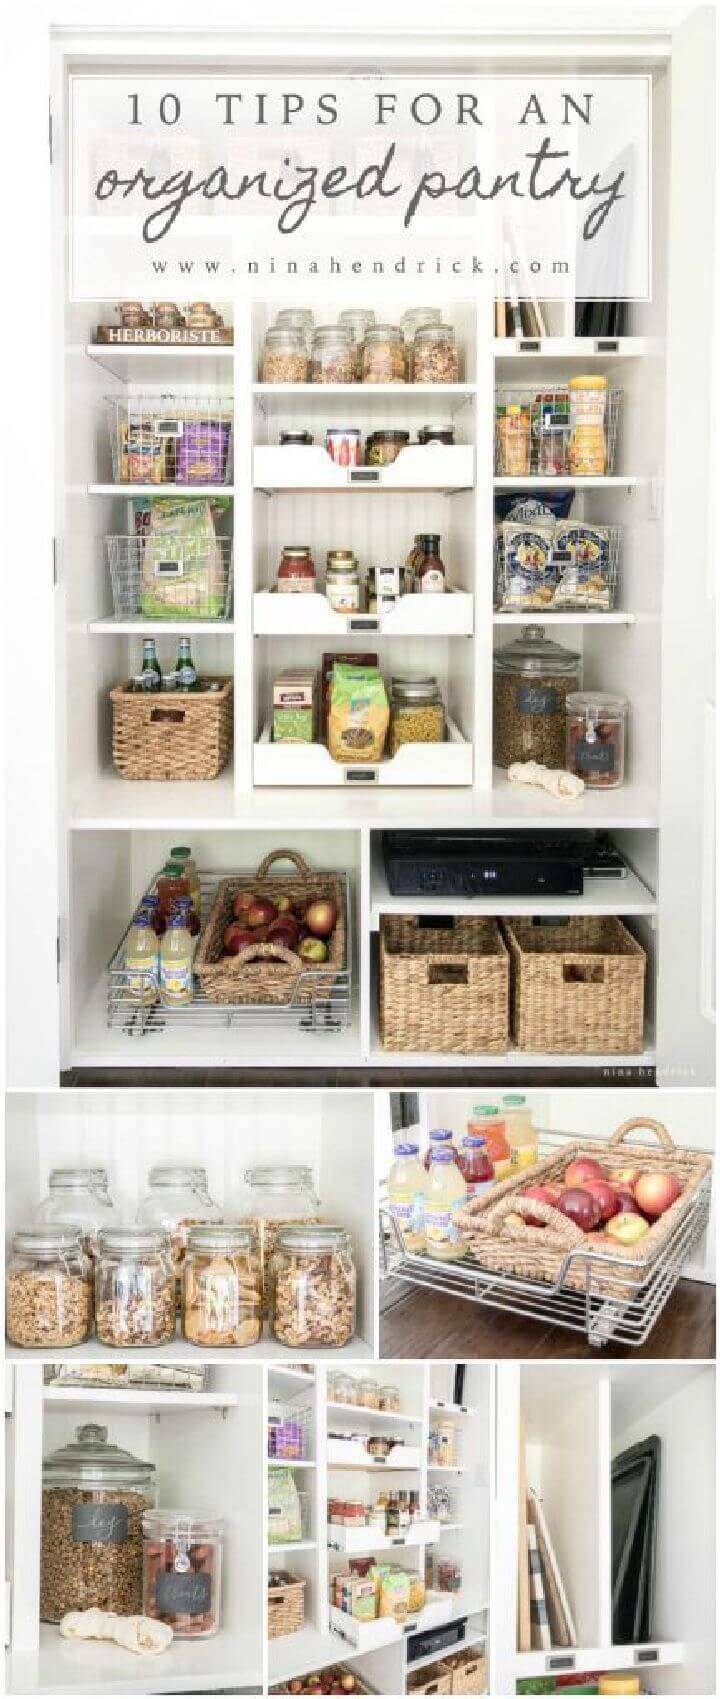 Tips for an organized Pantry